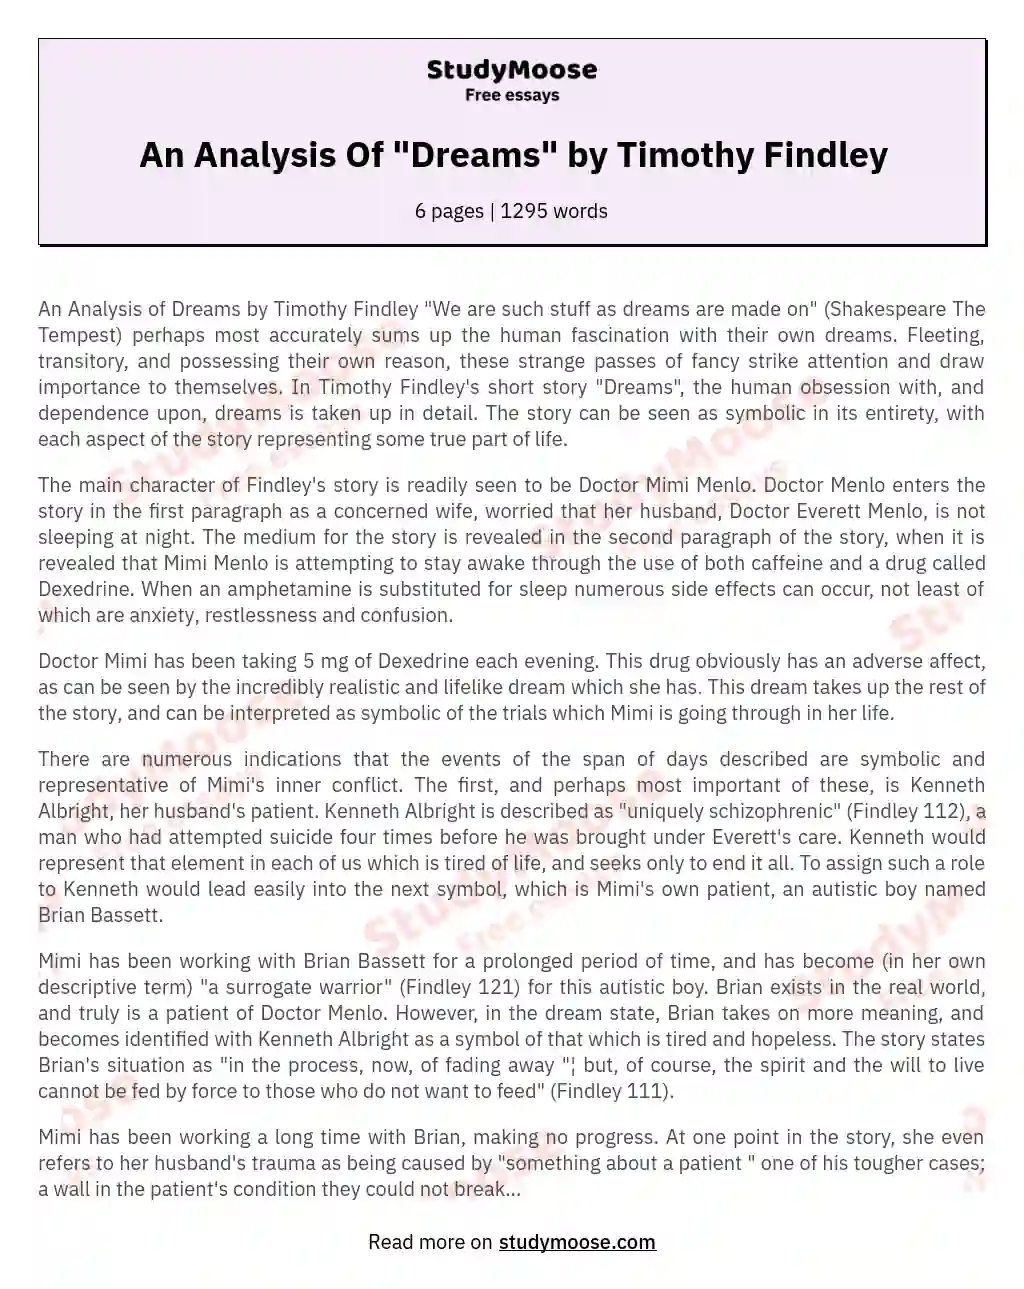 Dream Realities and Human Struggles in Findley's "Dream" essay